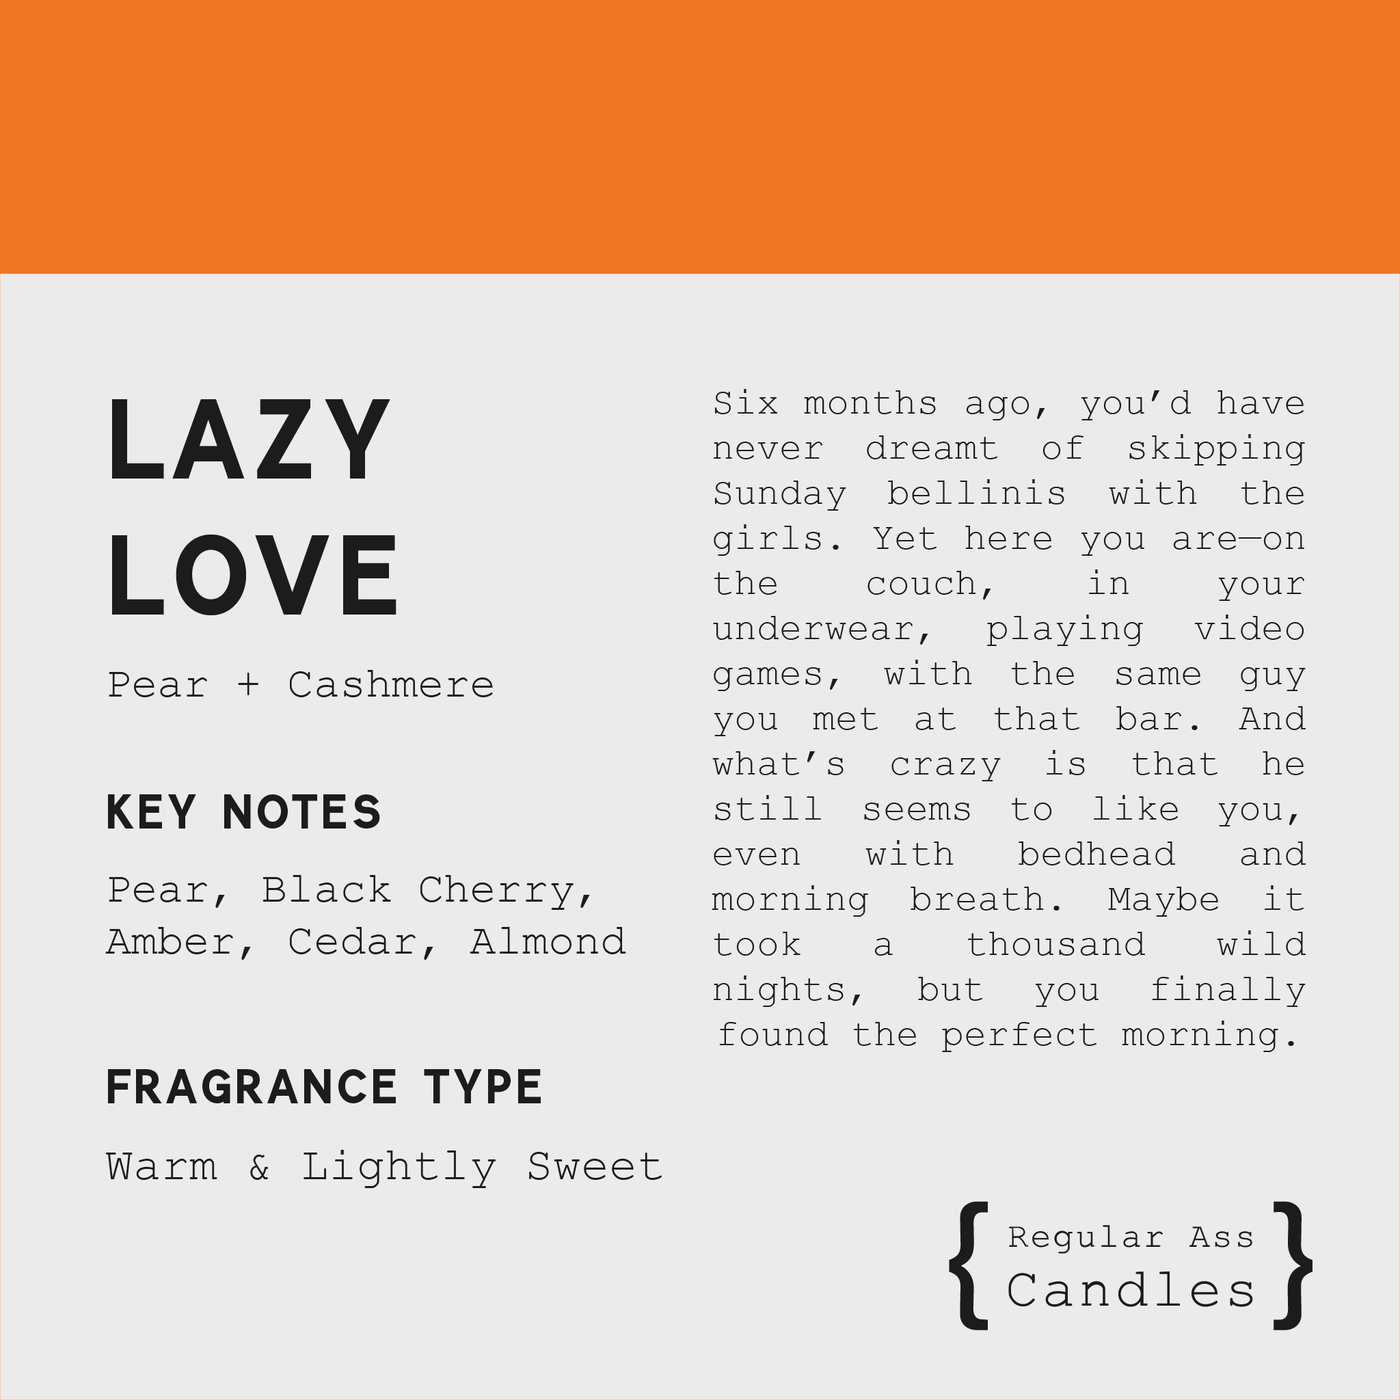 Lazy Love, Pear + Cashmere 11oz Candle